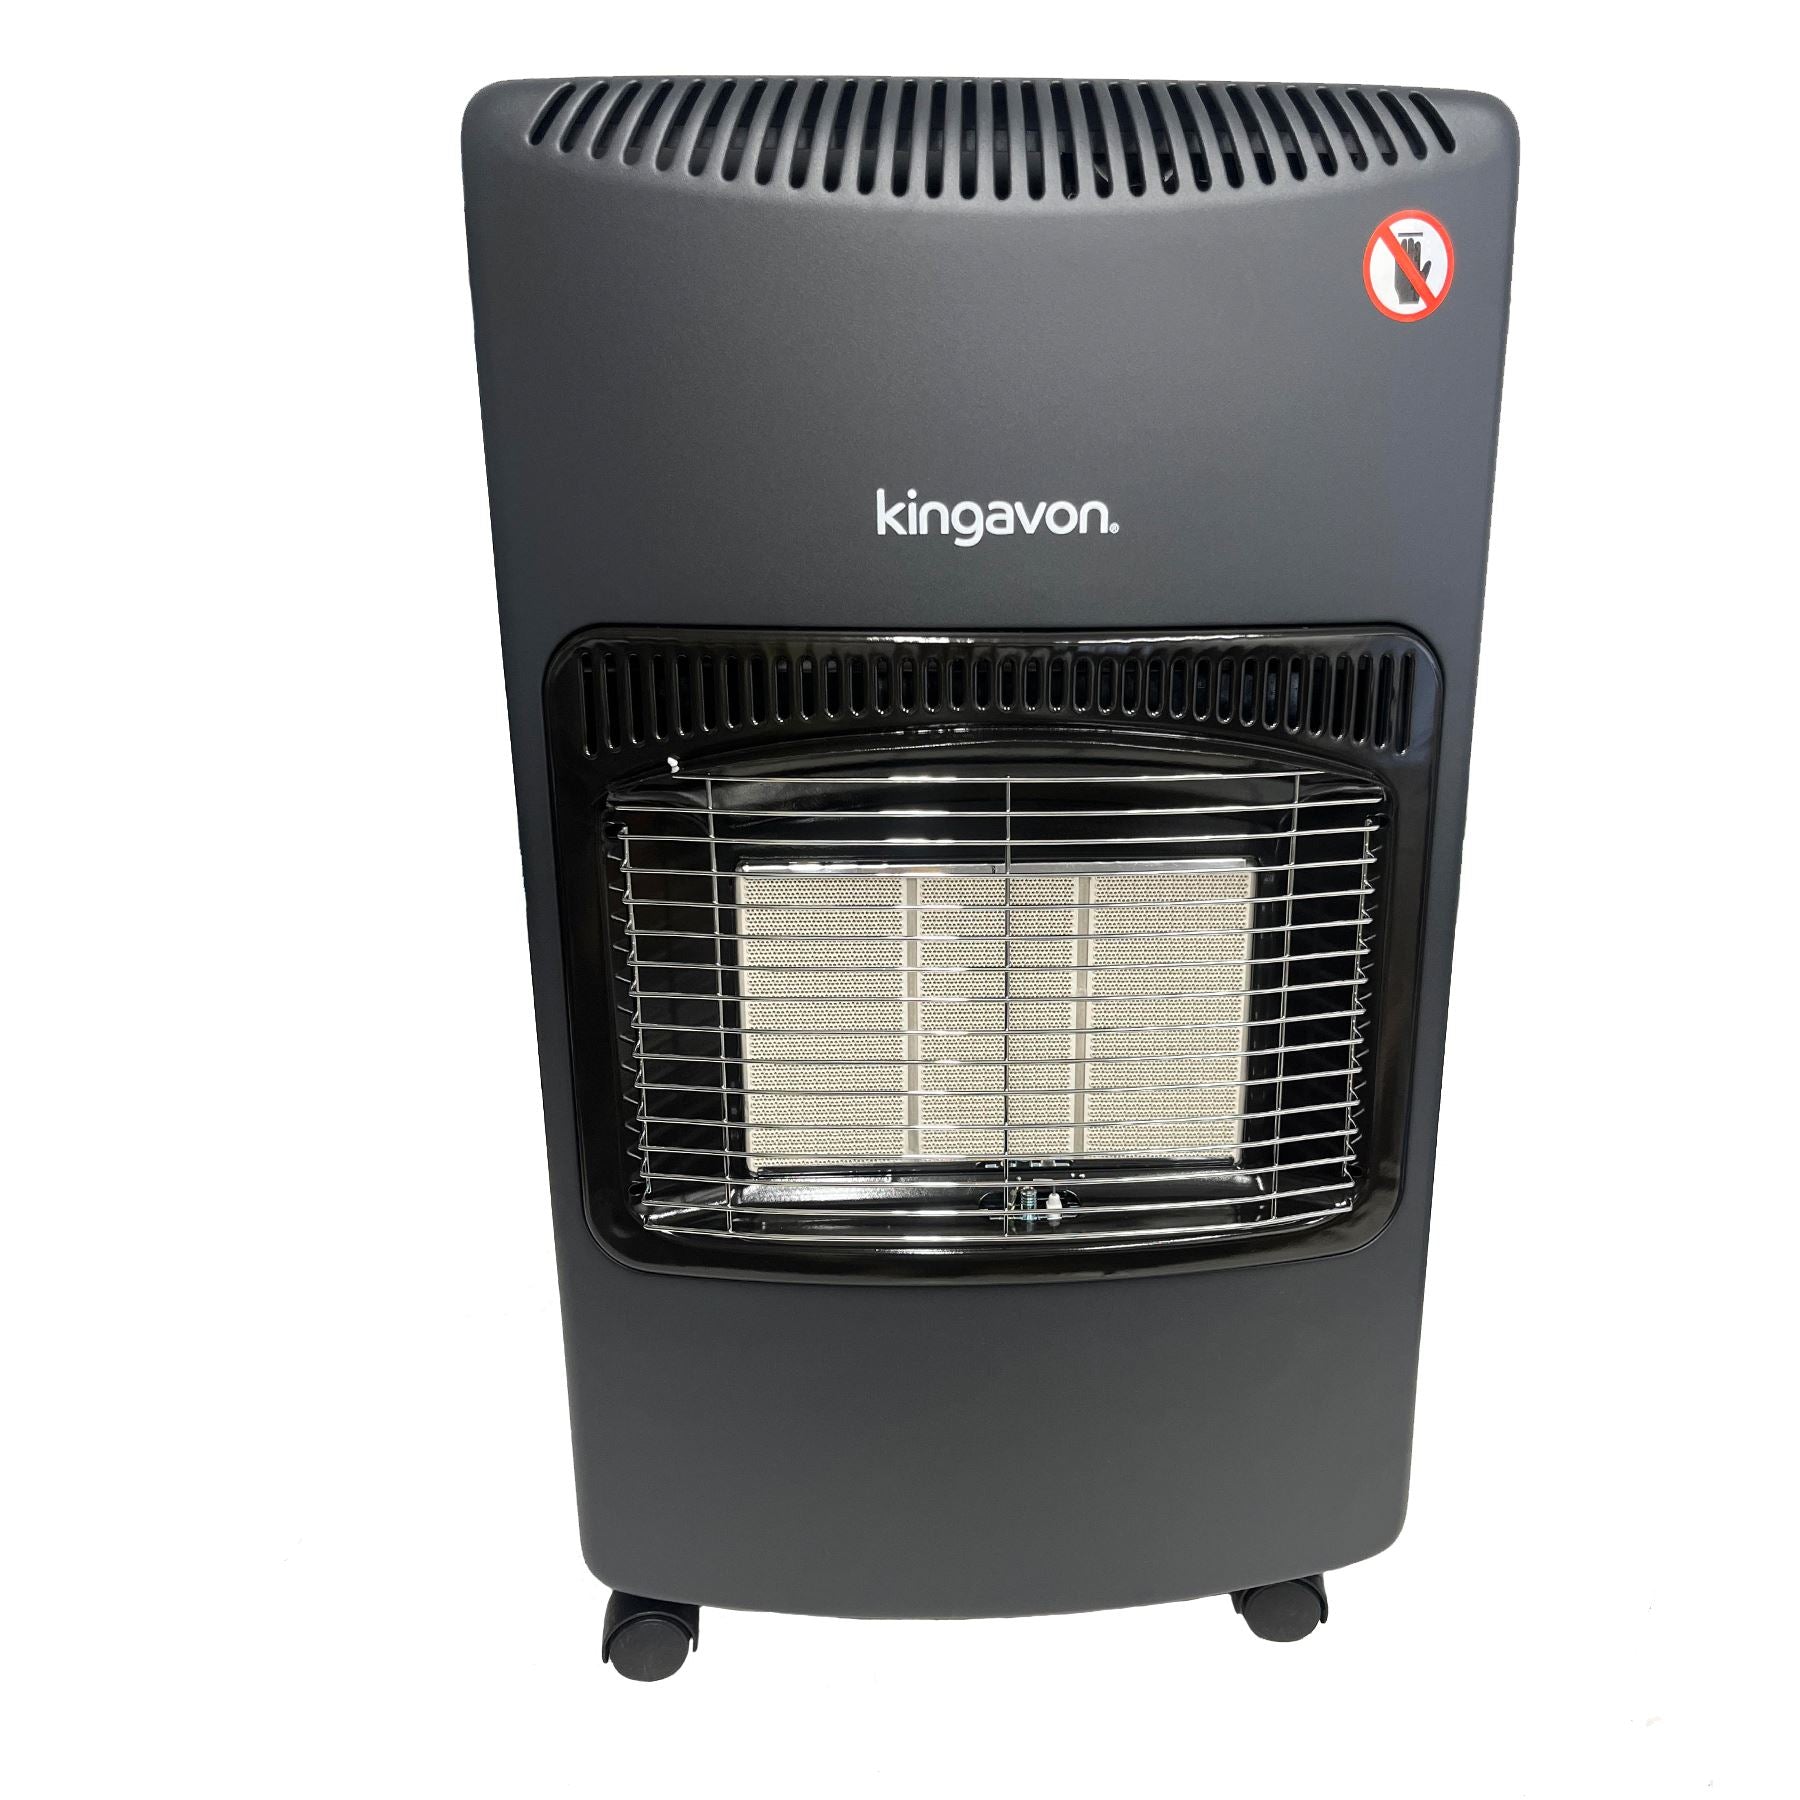 4.2KW Portable Butane Gas Cabinet Space Heater with Push on Regulator